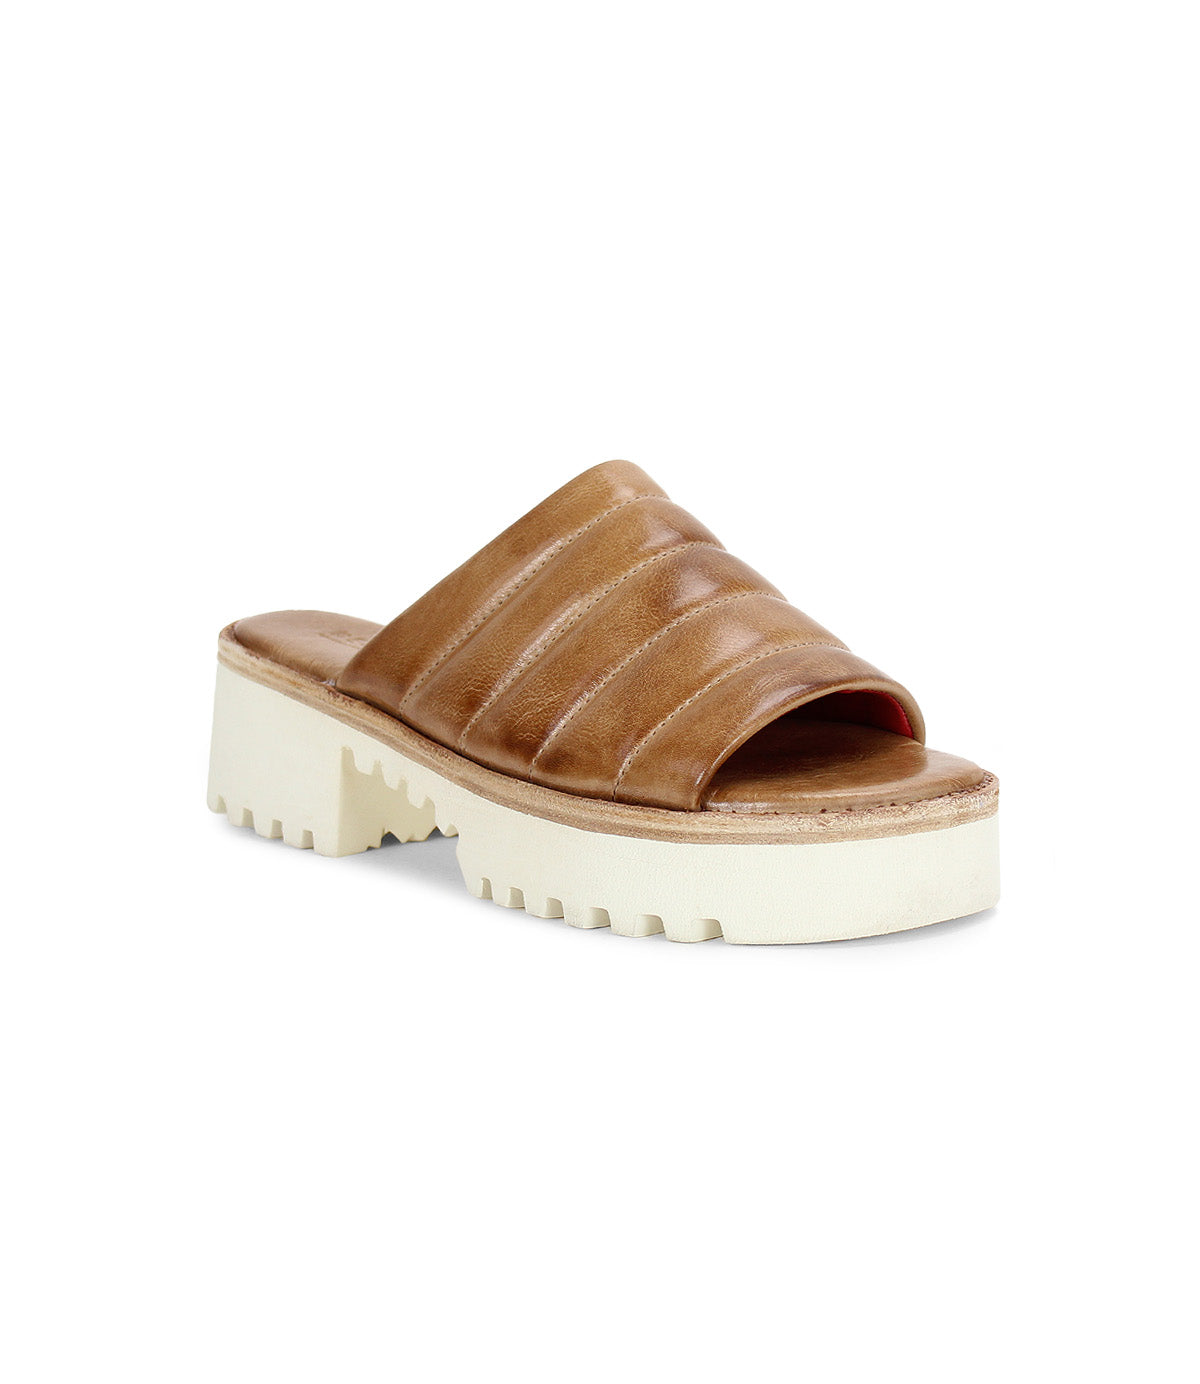 A Jones tan leather sandal with a white sole by Bed Stu.